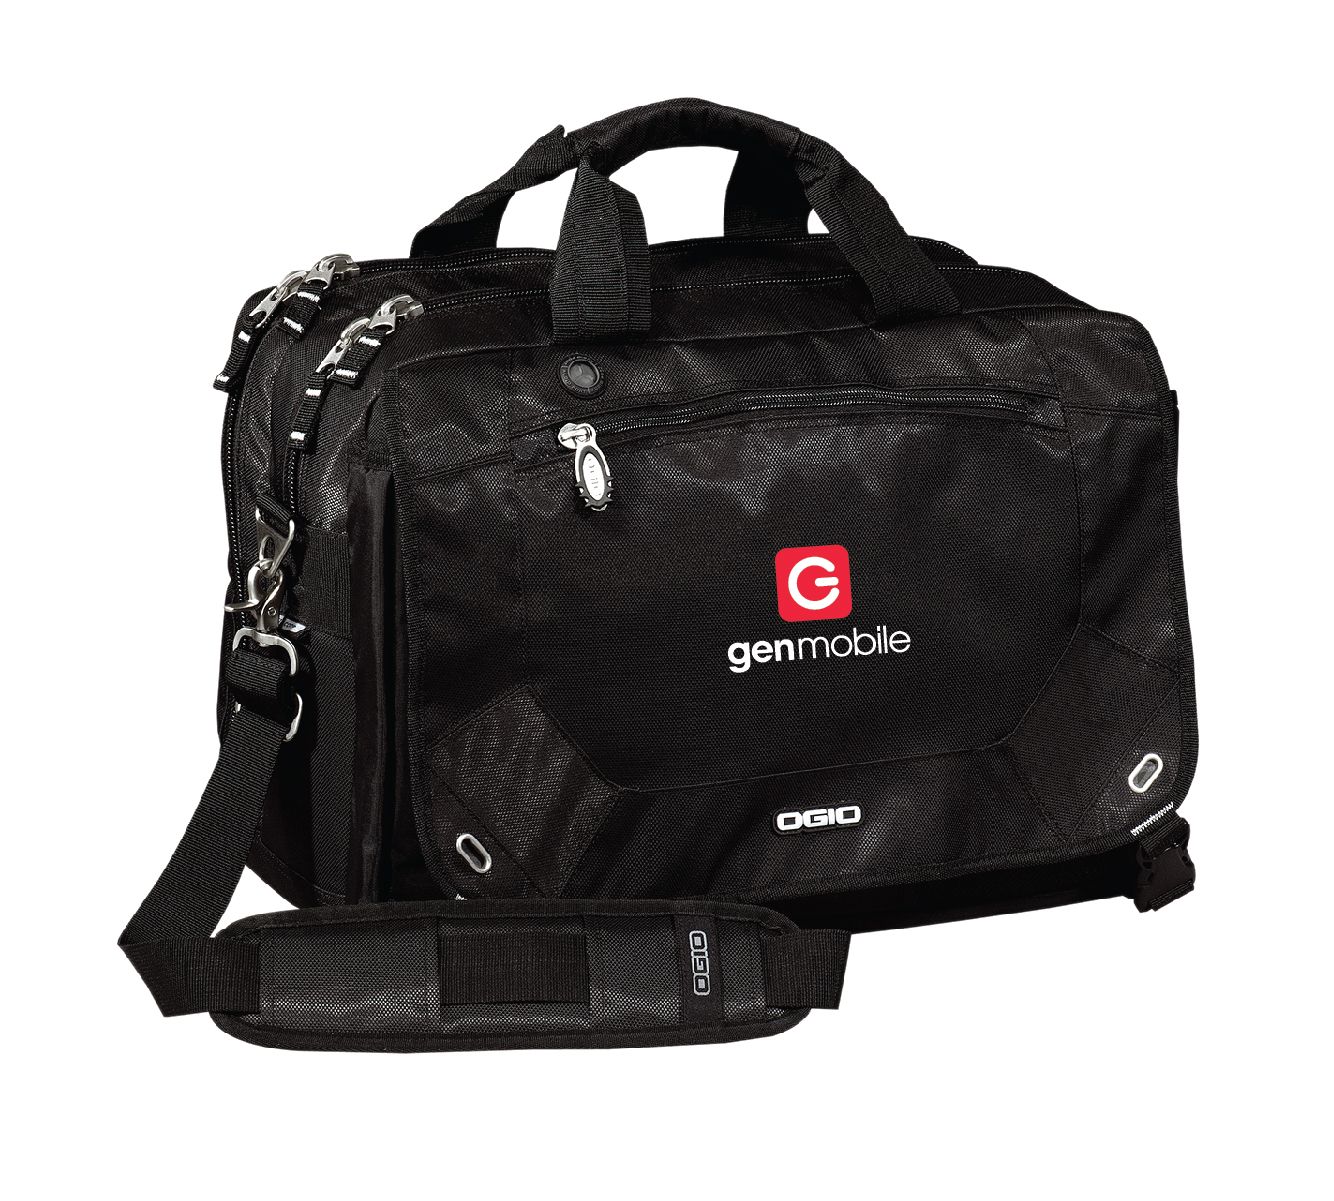 OGIO Corporate City Corp Messenger with Gen Mobile Logo